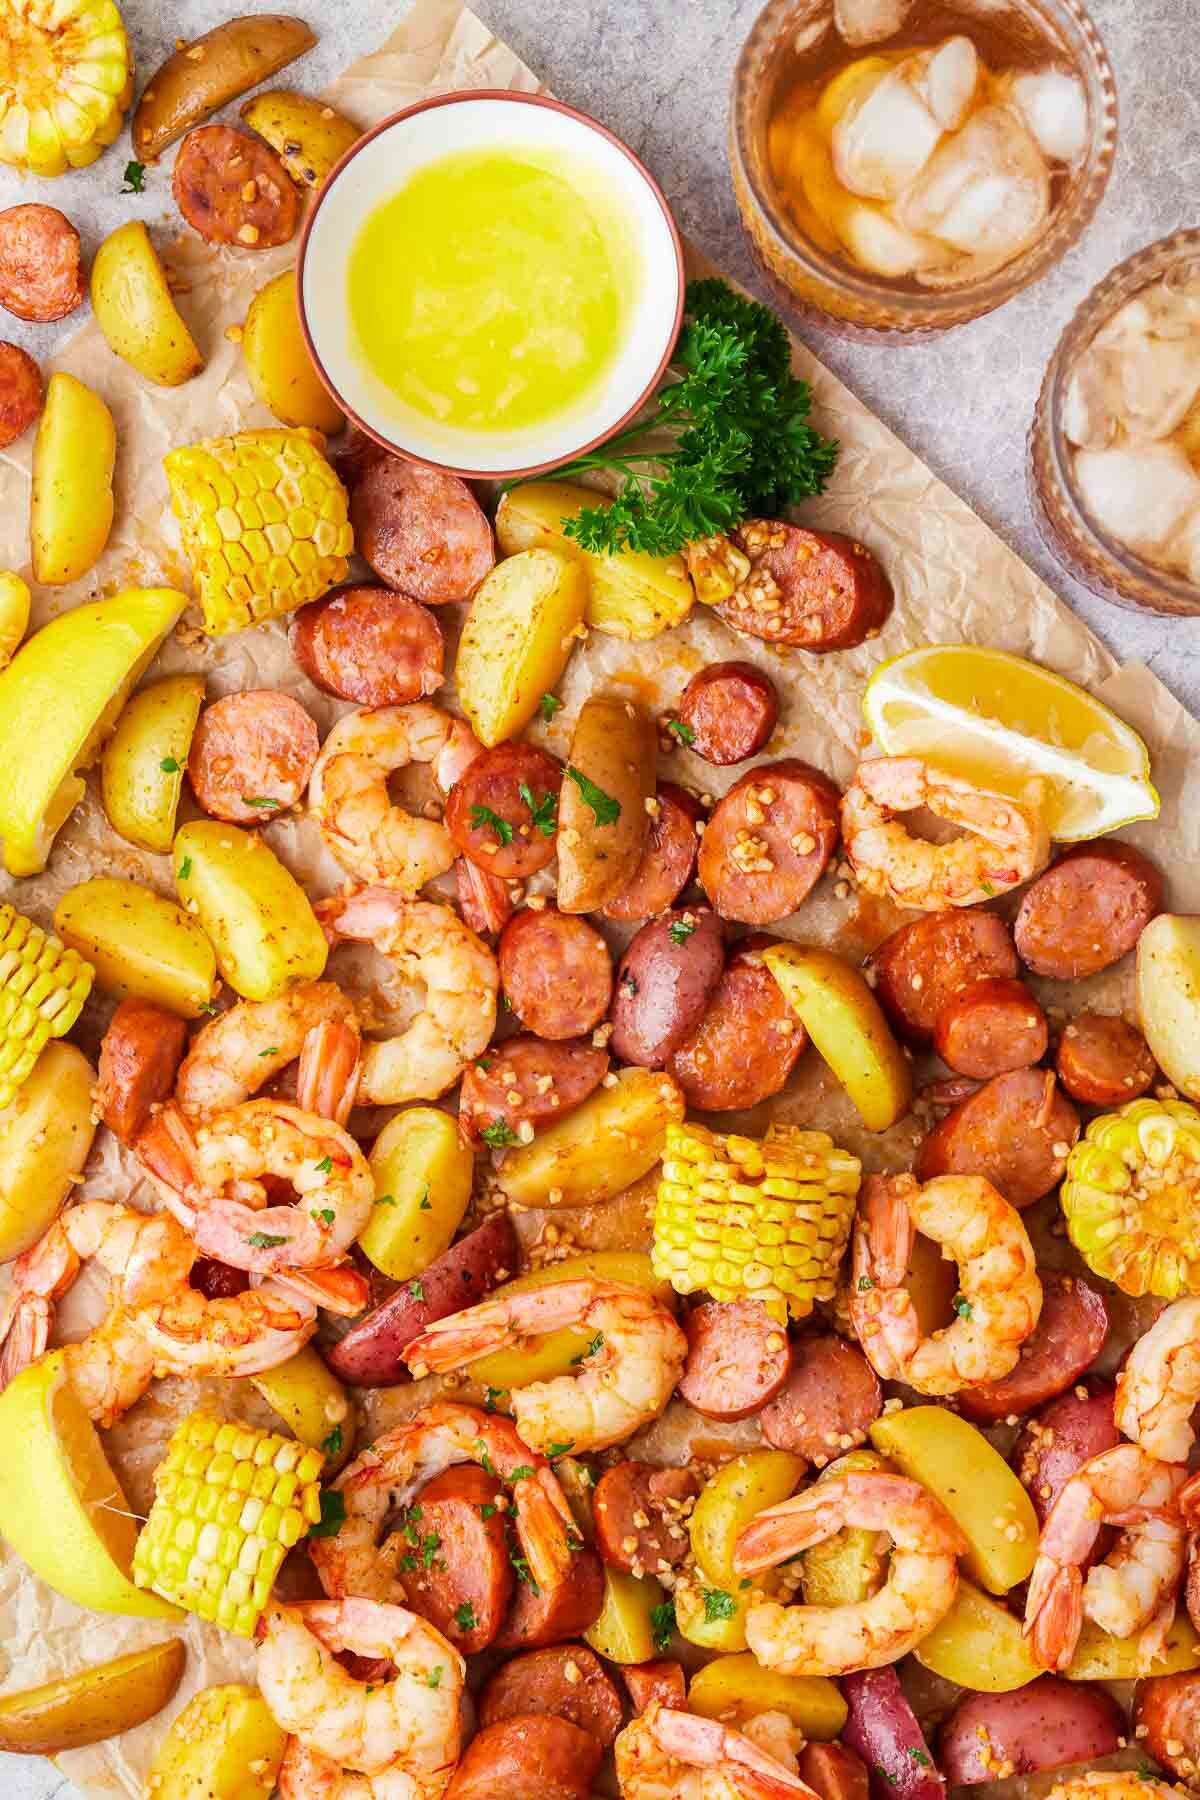 Shrimp boil that has been baked and being served on parchment paper.